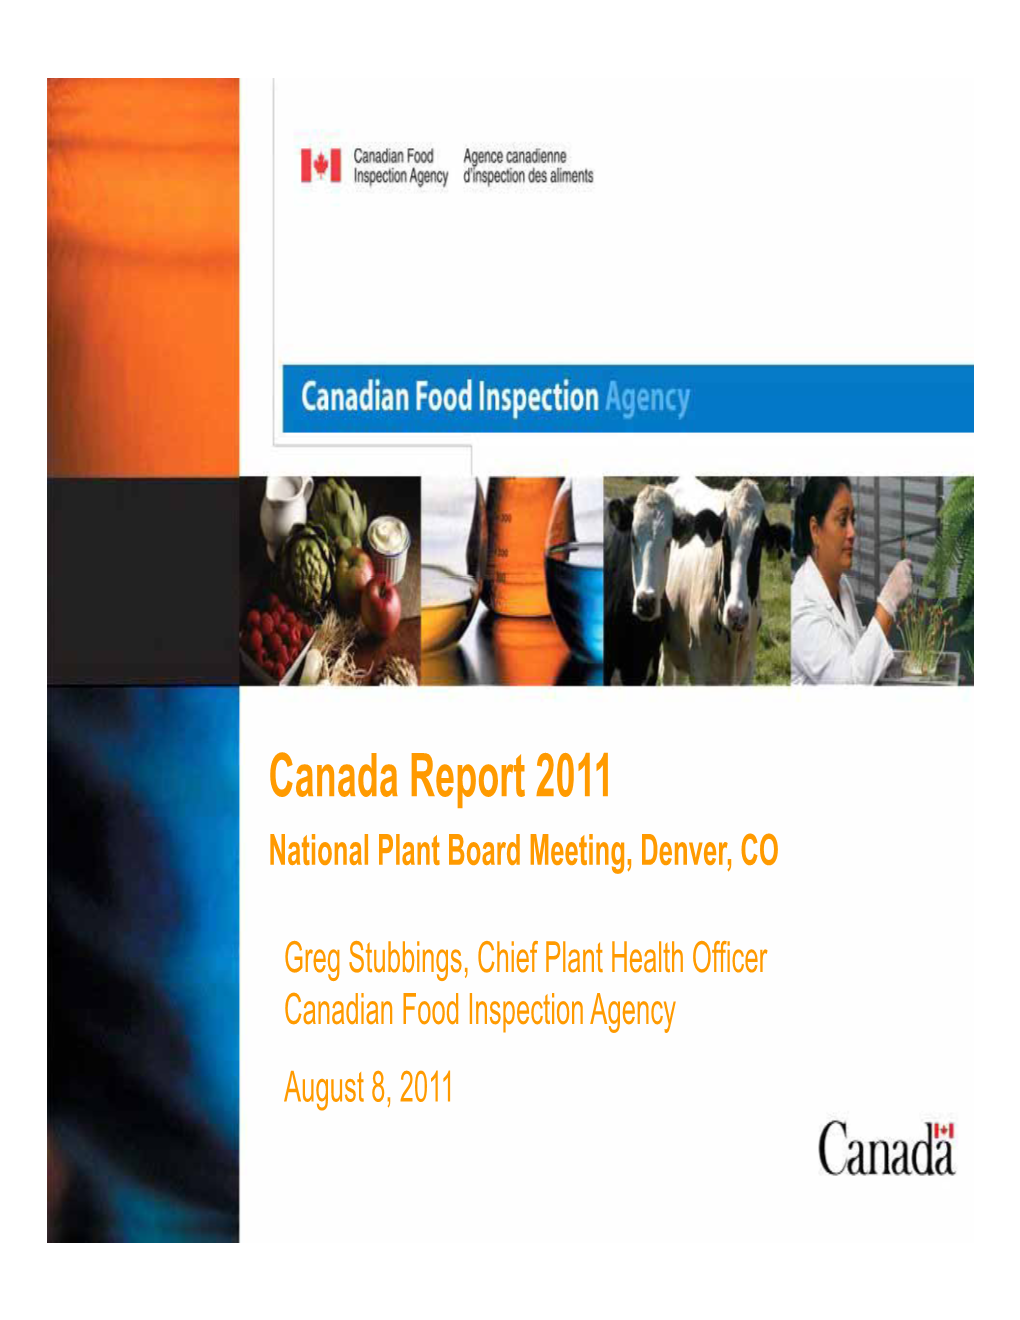 Canada Report 2011 National Plant Board Meeting, Denver, CO